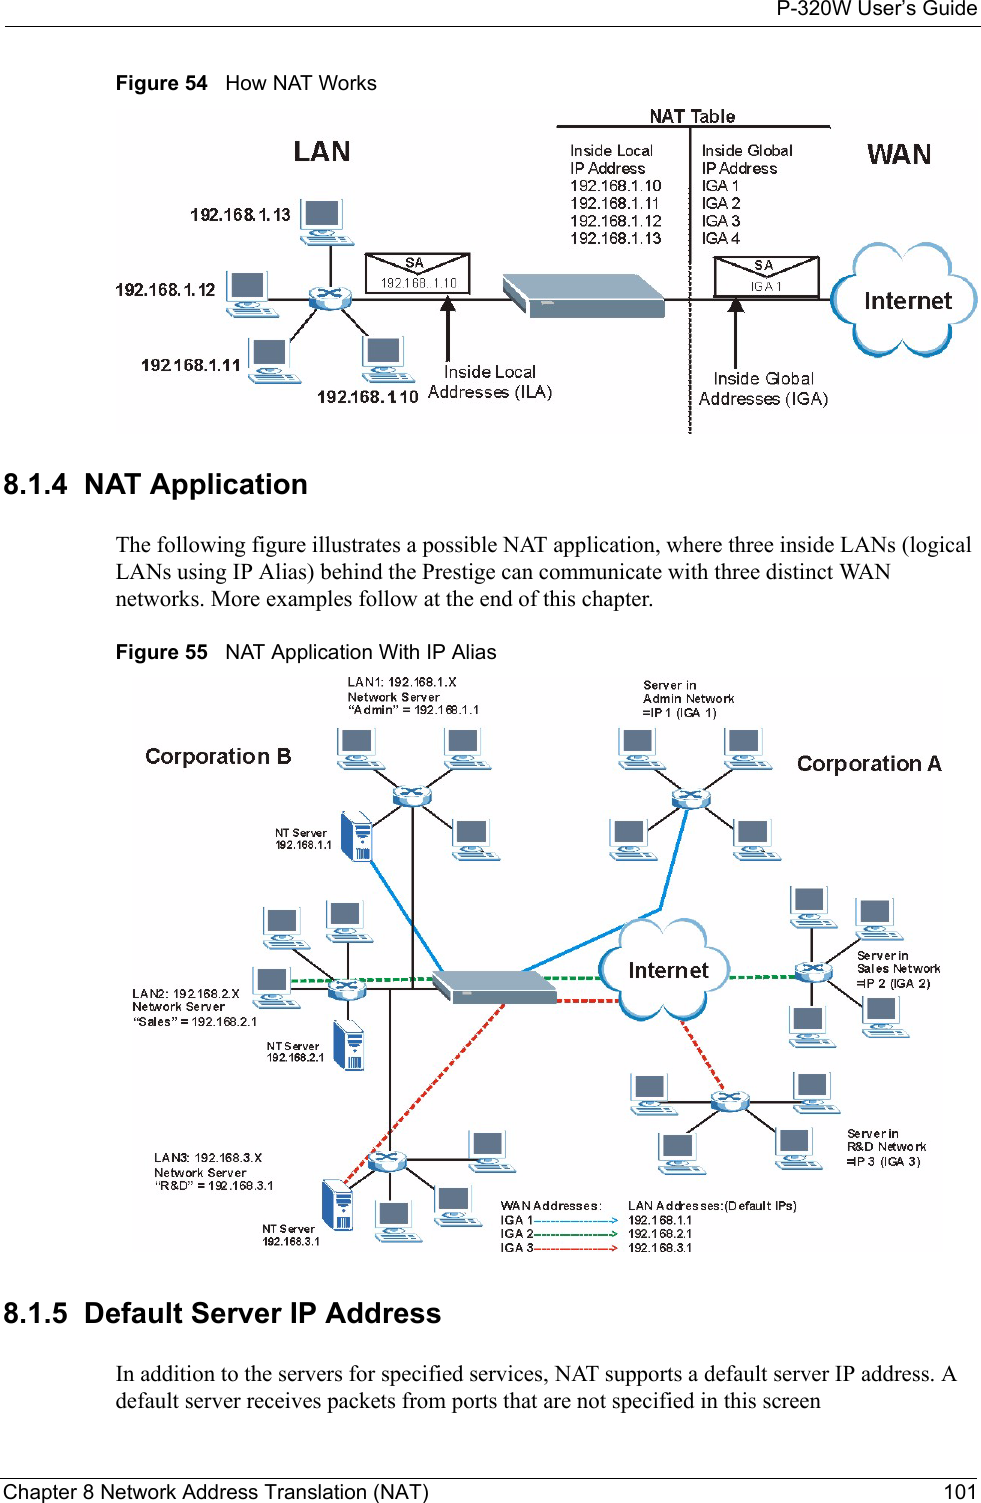 P-320W User’s GuideChapter 8 Network Address Translation (NAT) 101Figure 54   How NAT Works8.1.4  NAT ApplicationThe following figure illustrates a possible NAT application, where three inside LANs (logical LANs using IP Alias) behind the Prestige can communicate with three distinct WAN networks. More examples follow at the end of this chapter.Figure 55   NAT Application With IP Alias8.1.5  Default Server IP AddressIn addition to the servers for specified services, NAT supports a default server IP address. A default server receives packets from ports that are not specified in this screen